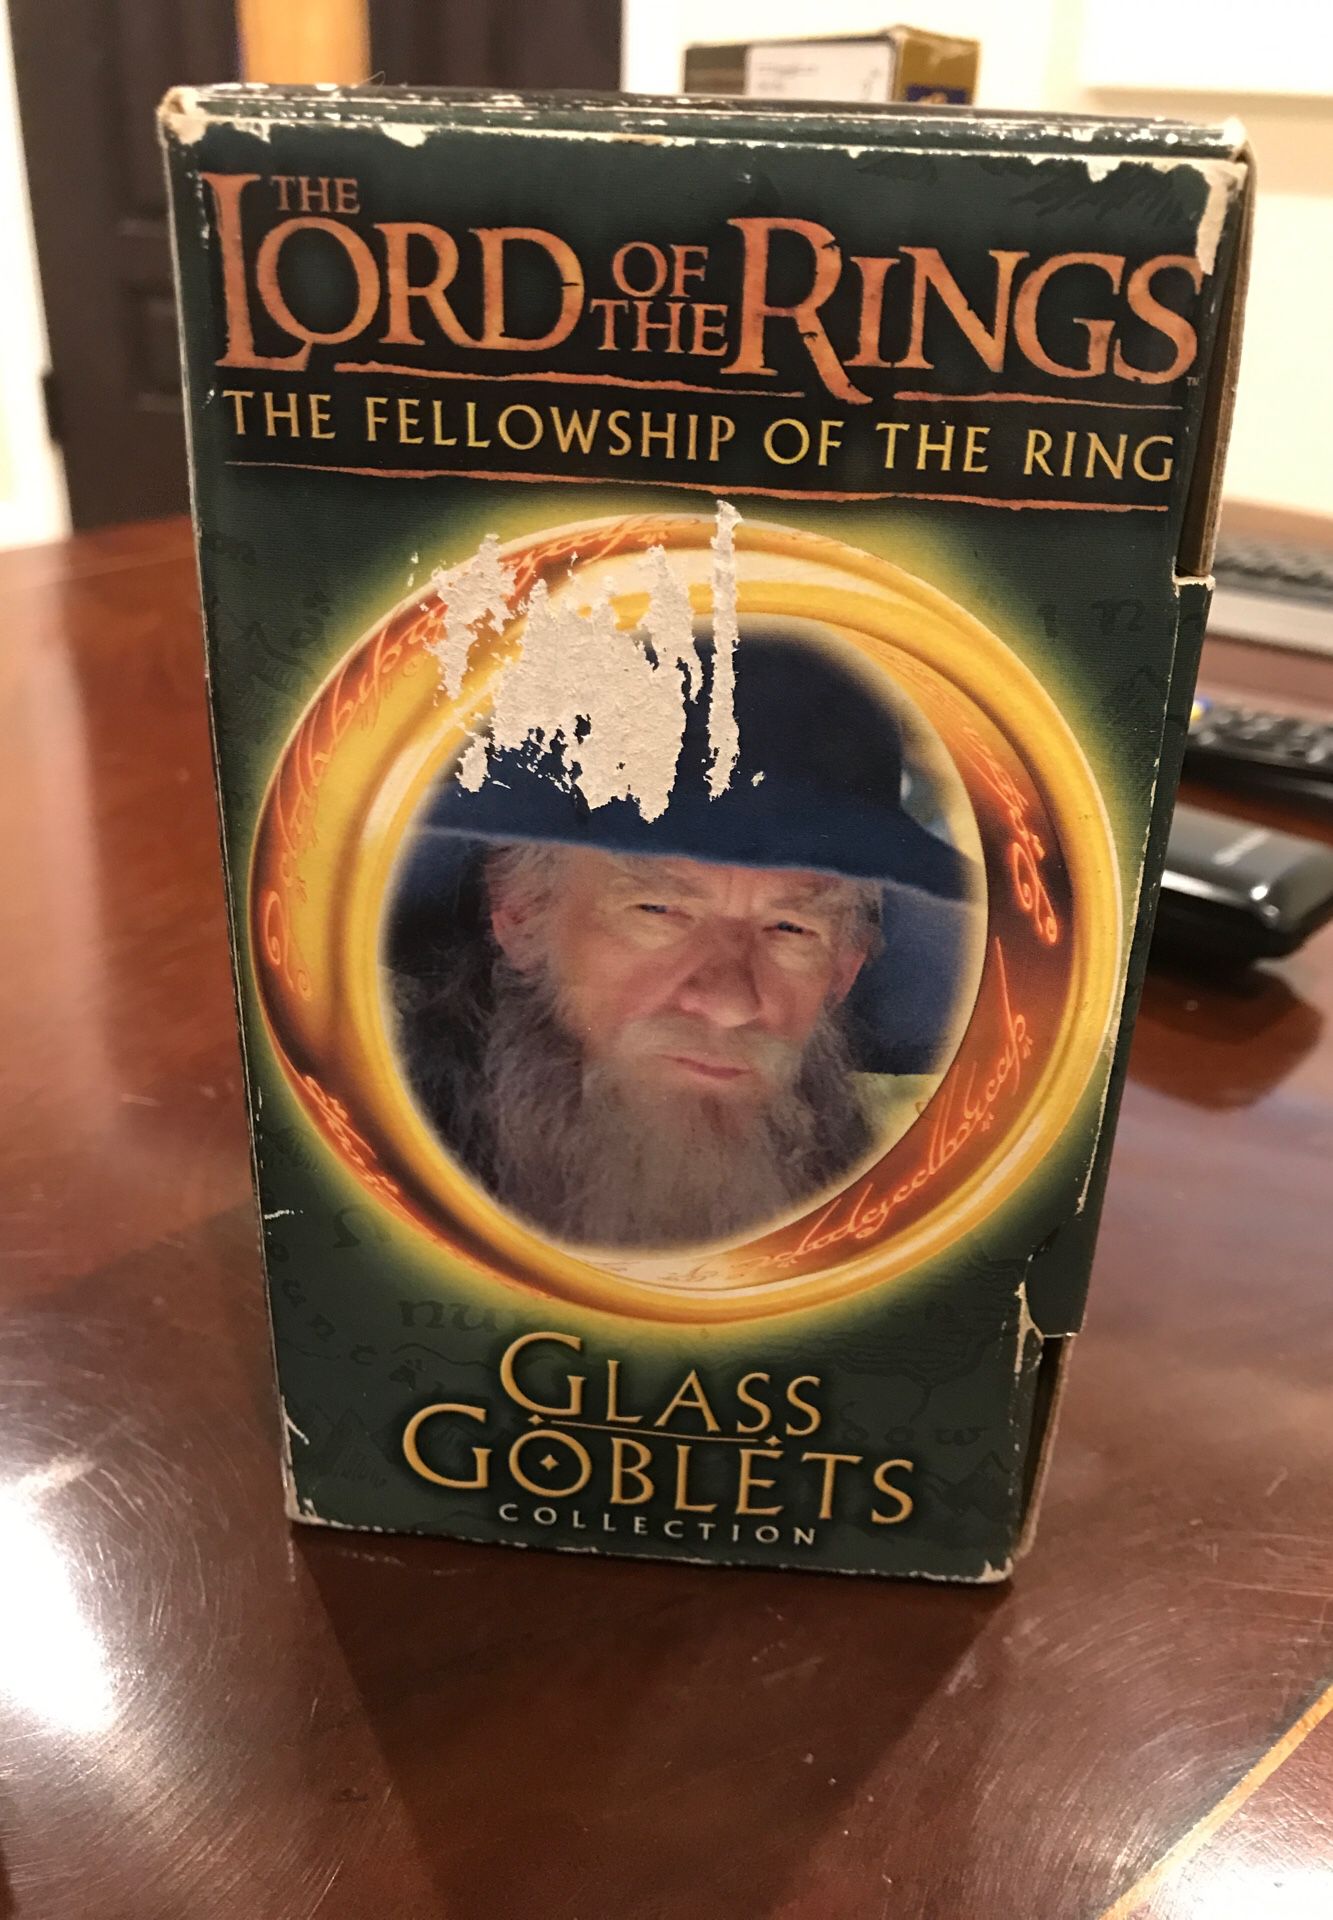 Collection glasses THE LORD OF THE RINGS